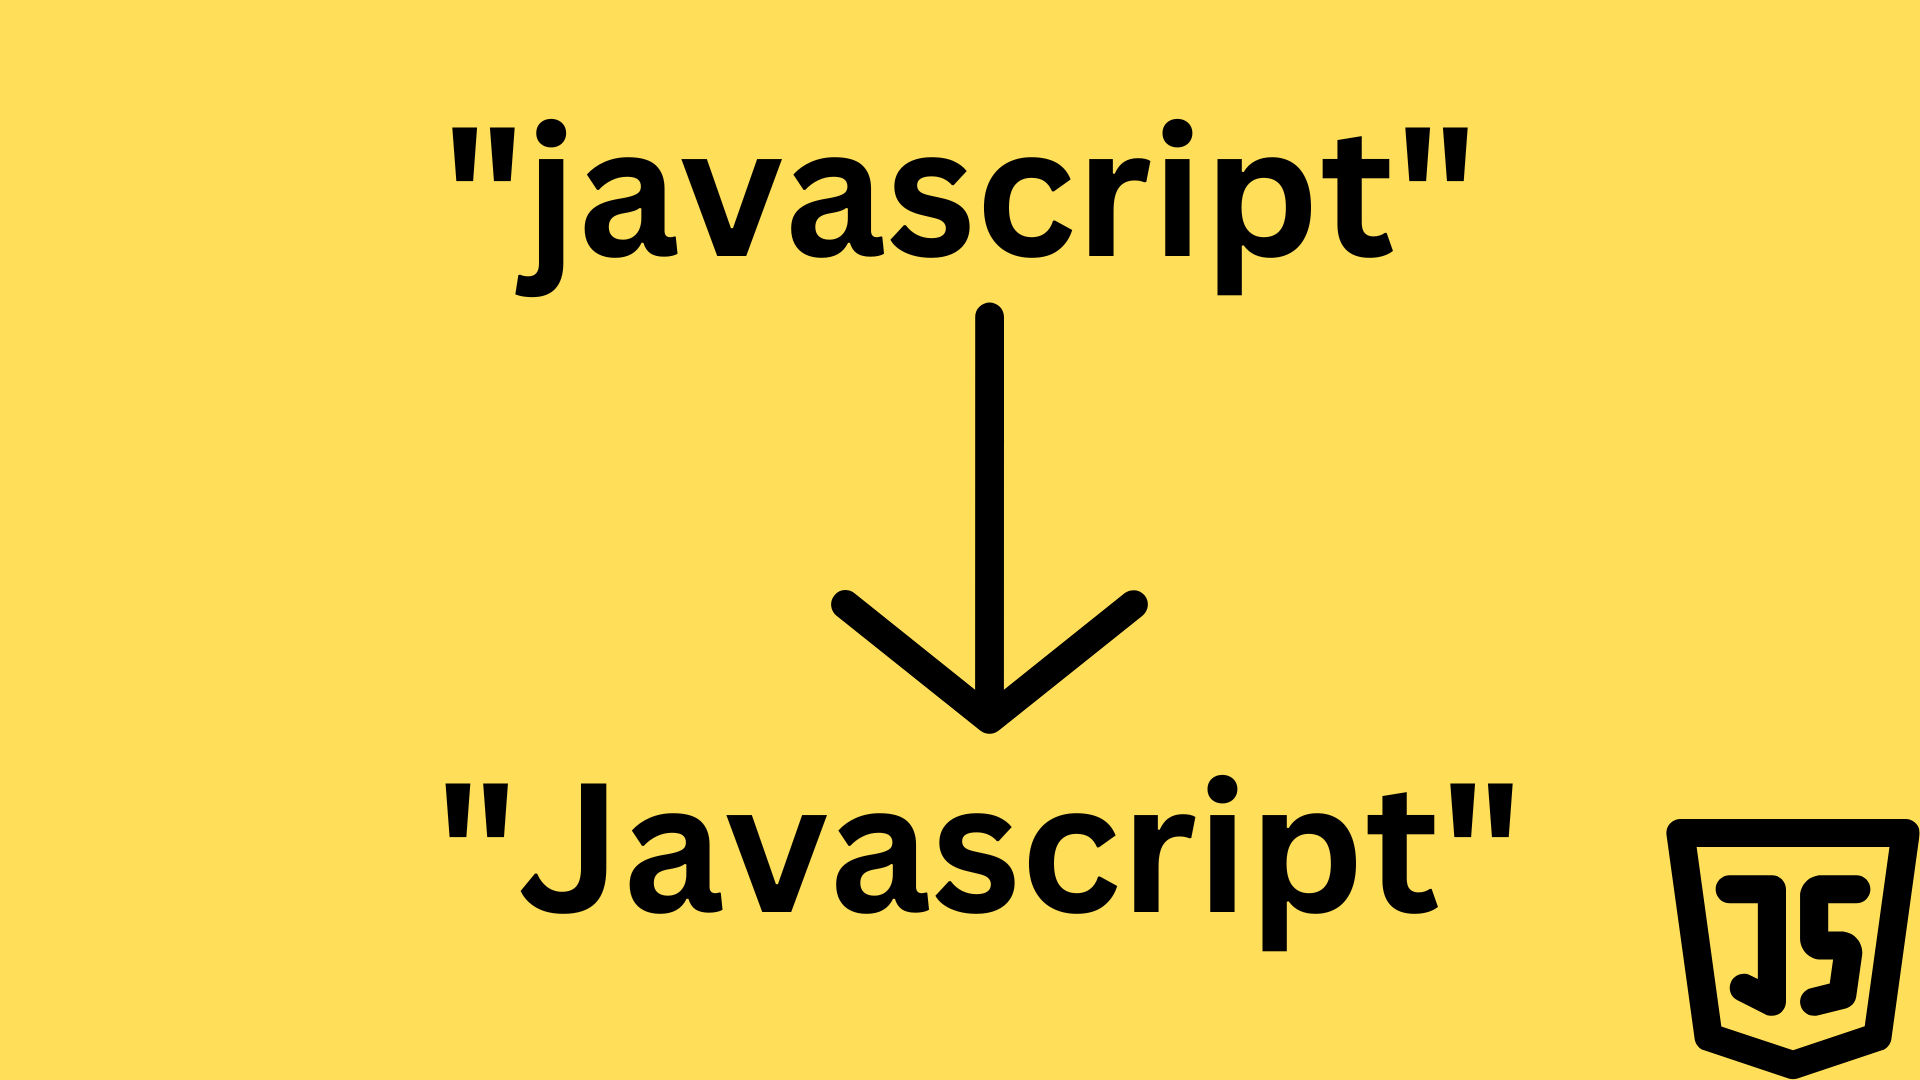 How to Capitalize a Word in JavaScript